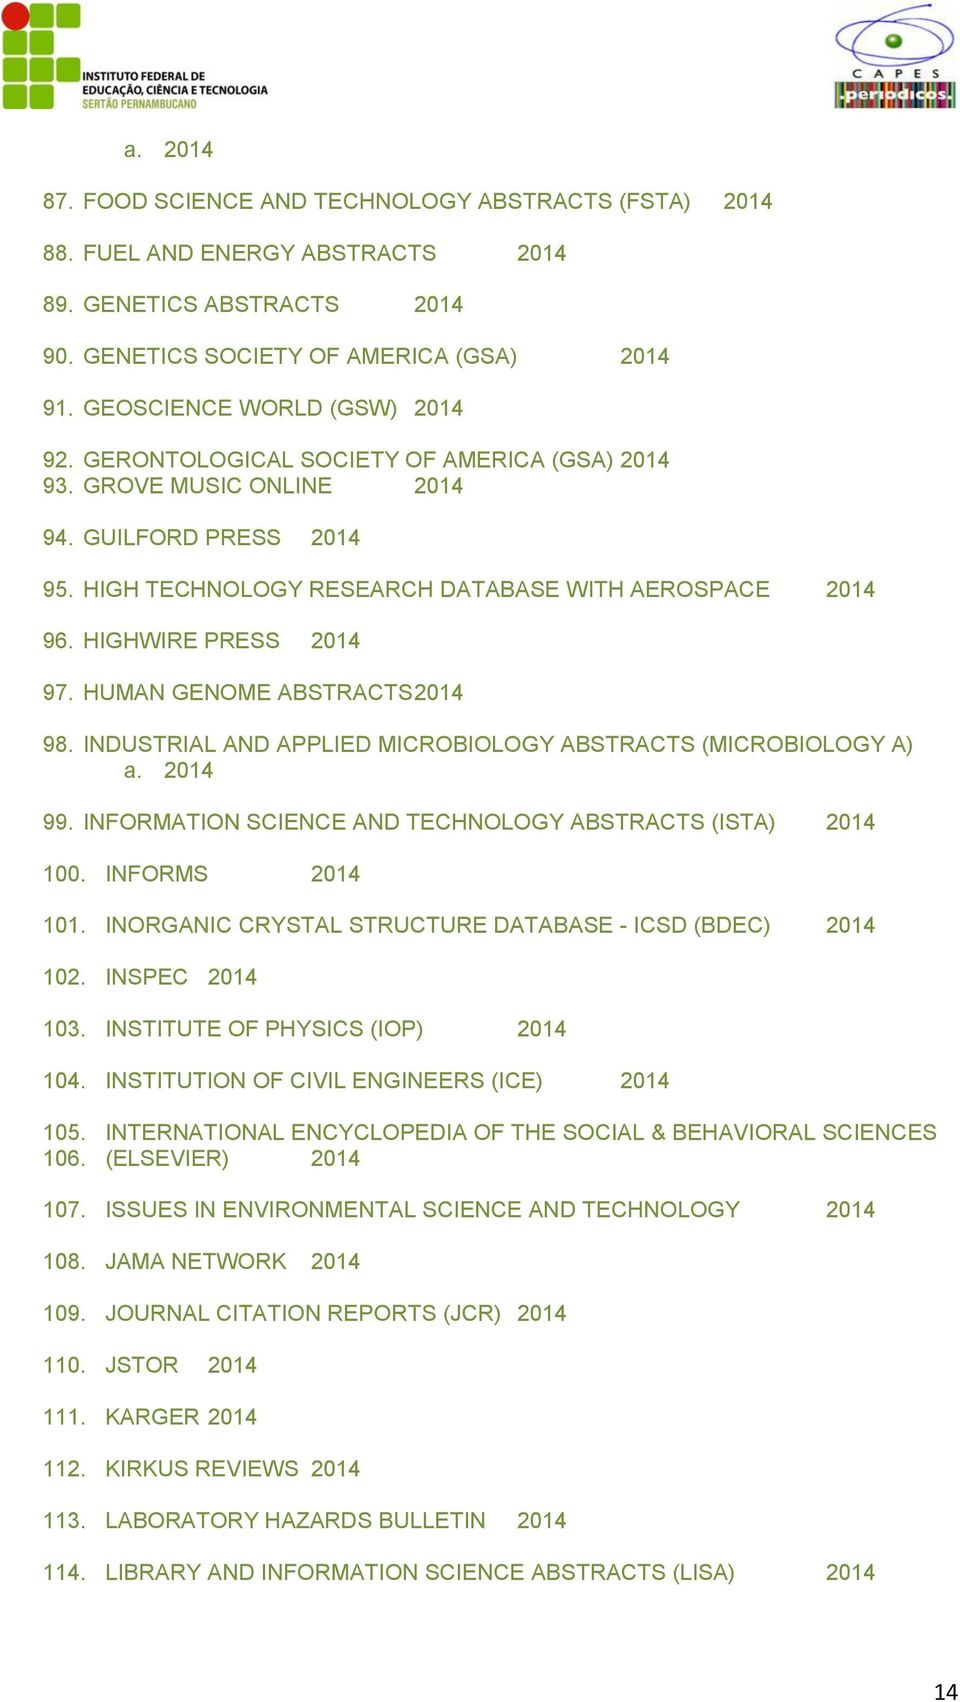 HIGHWIRE PRESS 2014 97. HUMAN GENOME ABSTRACTS 2014 98. INDUSTRIAL AND APPLIED MICROBIOLOGY ABSTRACTS (MICROBIOLOGY A) a. 2014 99. INFORMATION SCIENCE AND TECHNOLOGY ABSTRACTS (ISTA) 2014 100.